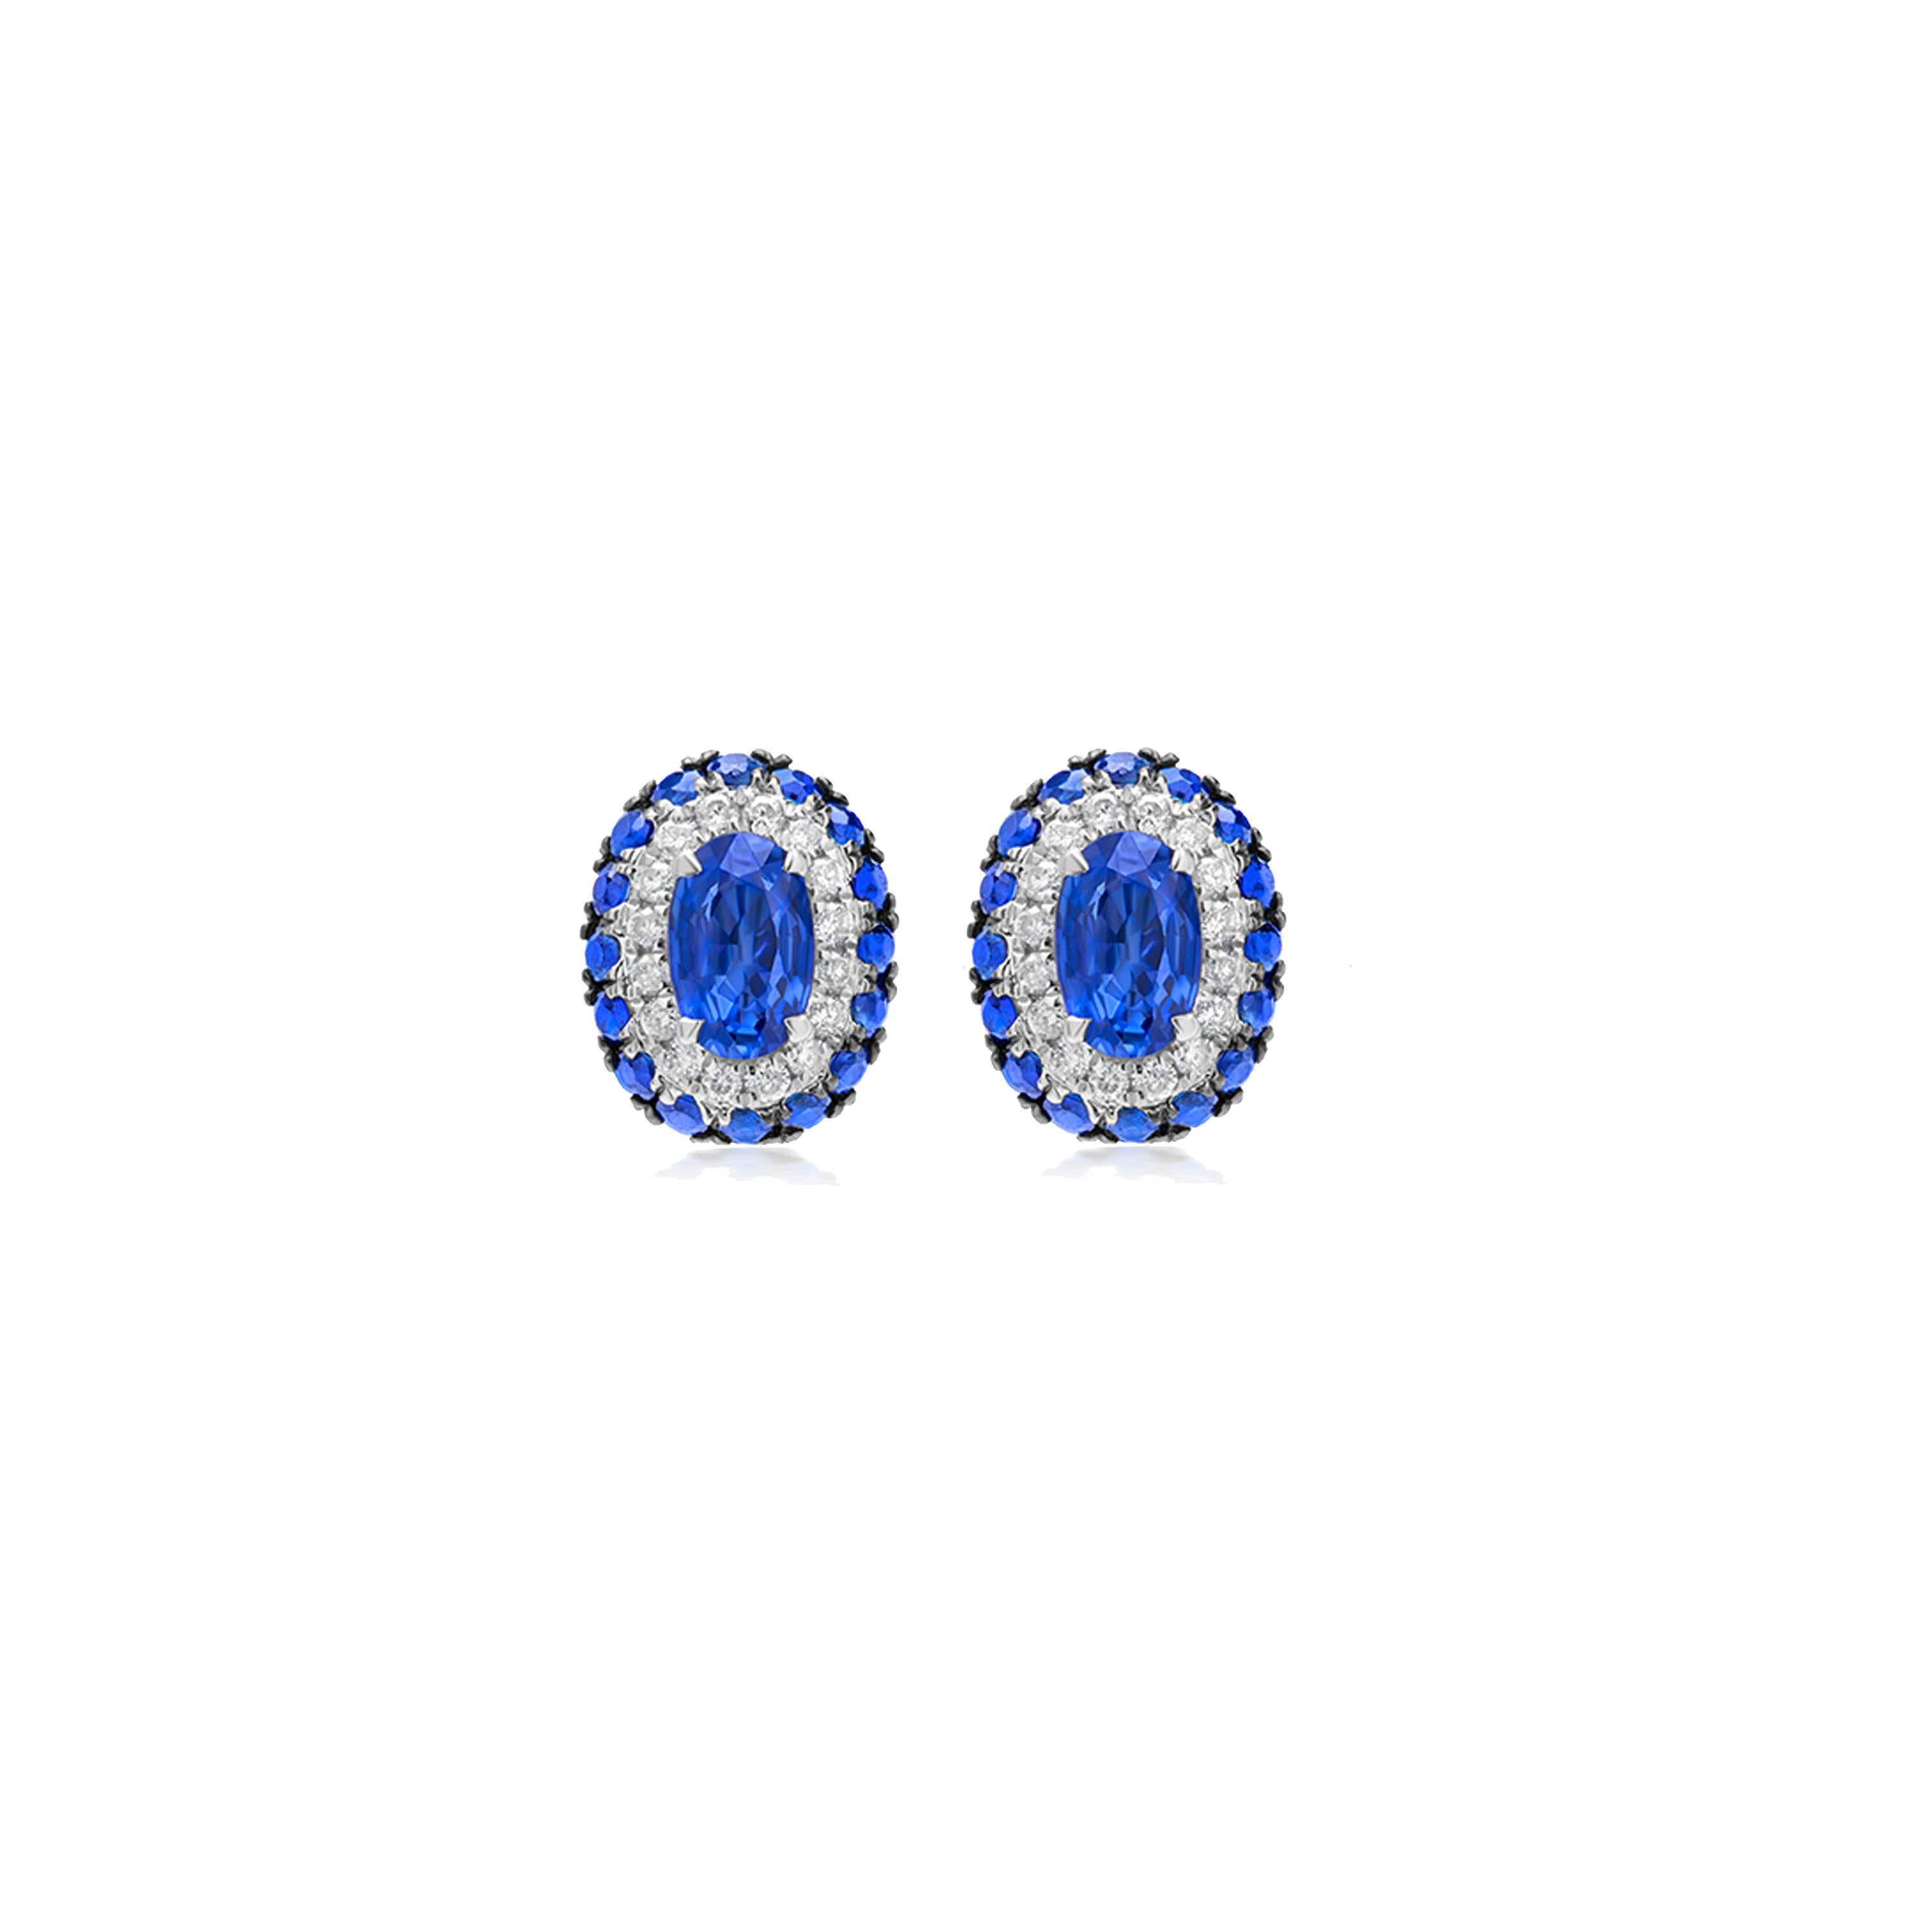 Oval Cut Gemistry 1.33cttw. Blue Sapphire and Diamond Stud Earrings in 18k White Gold